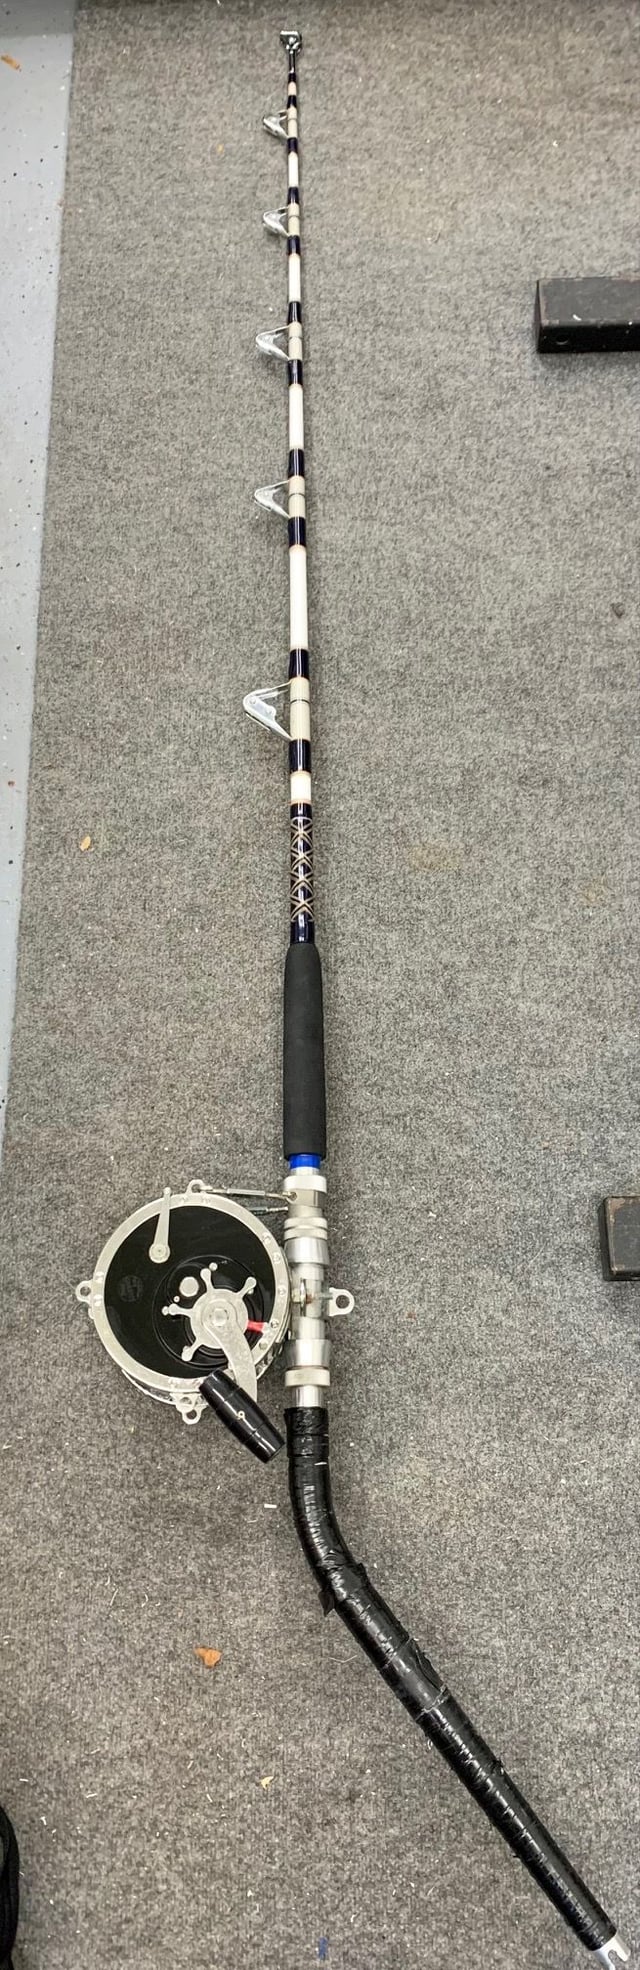 FS - Shimano, Penn, Daiwa inshore and offshore rods/reels - The